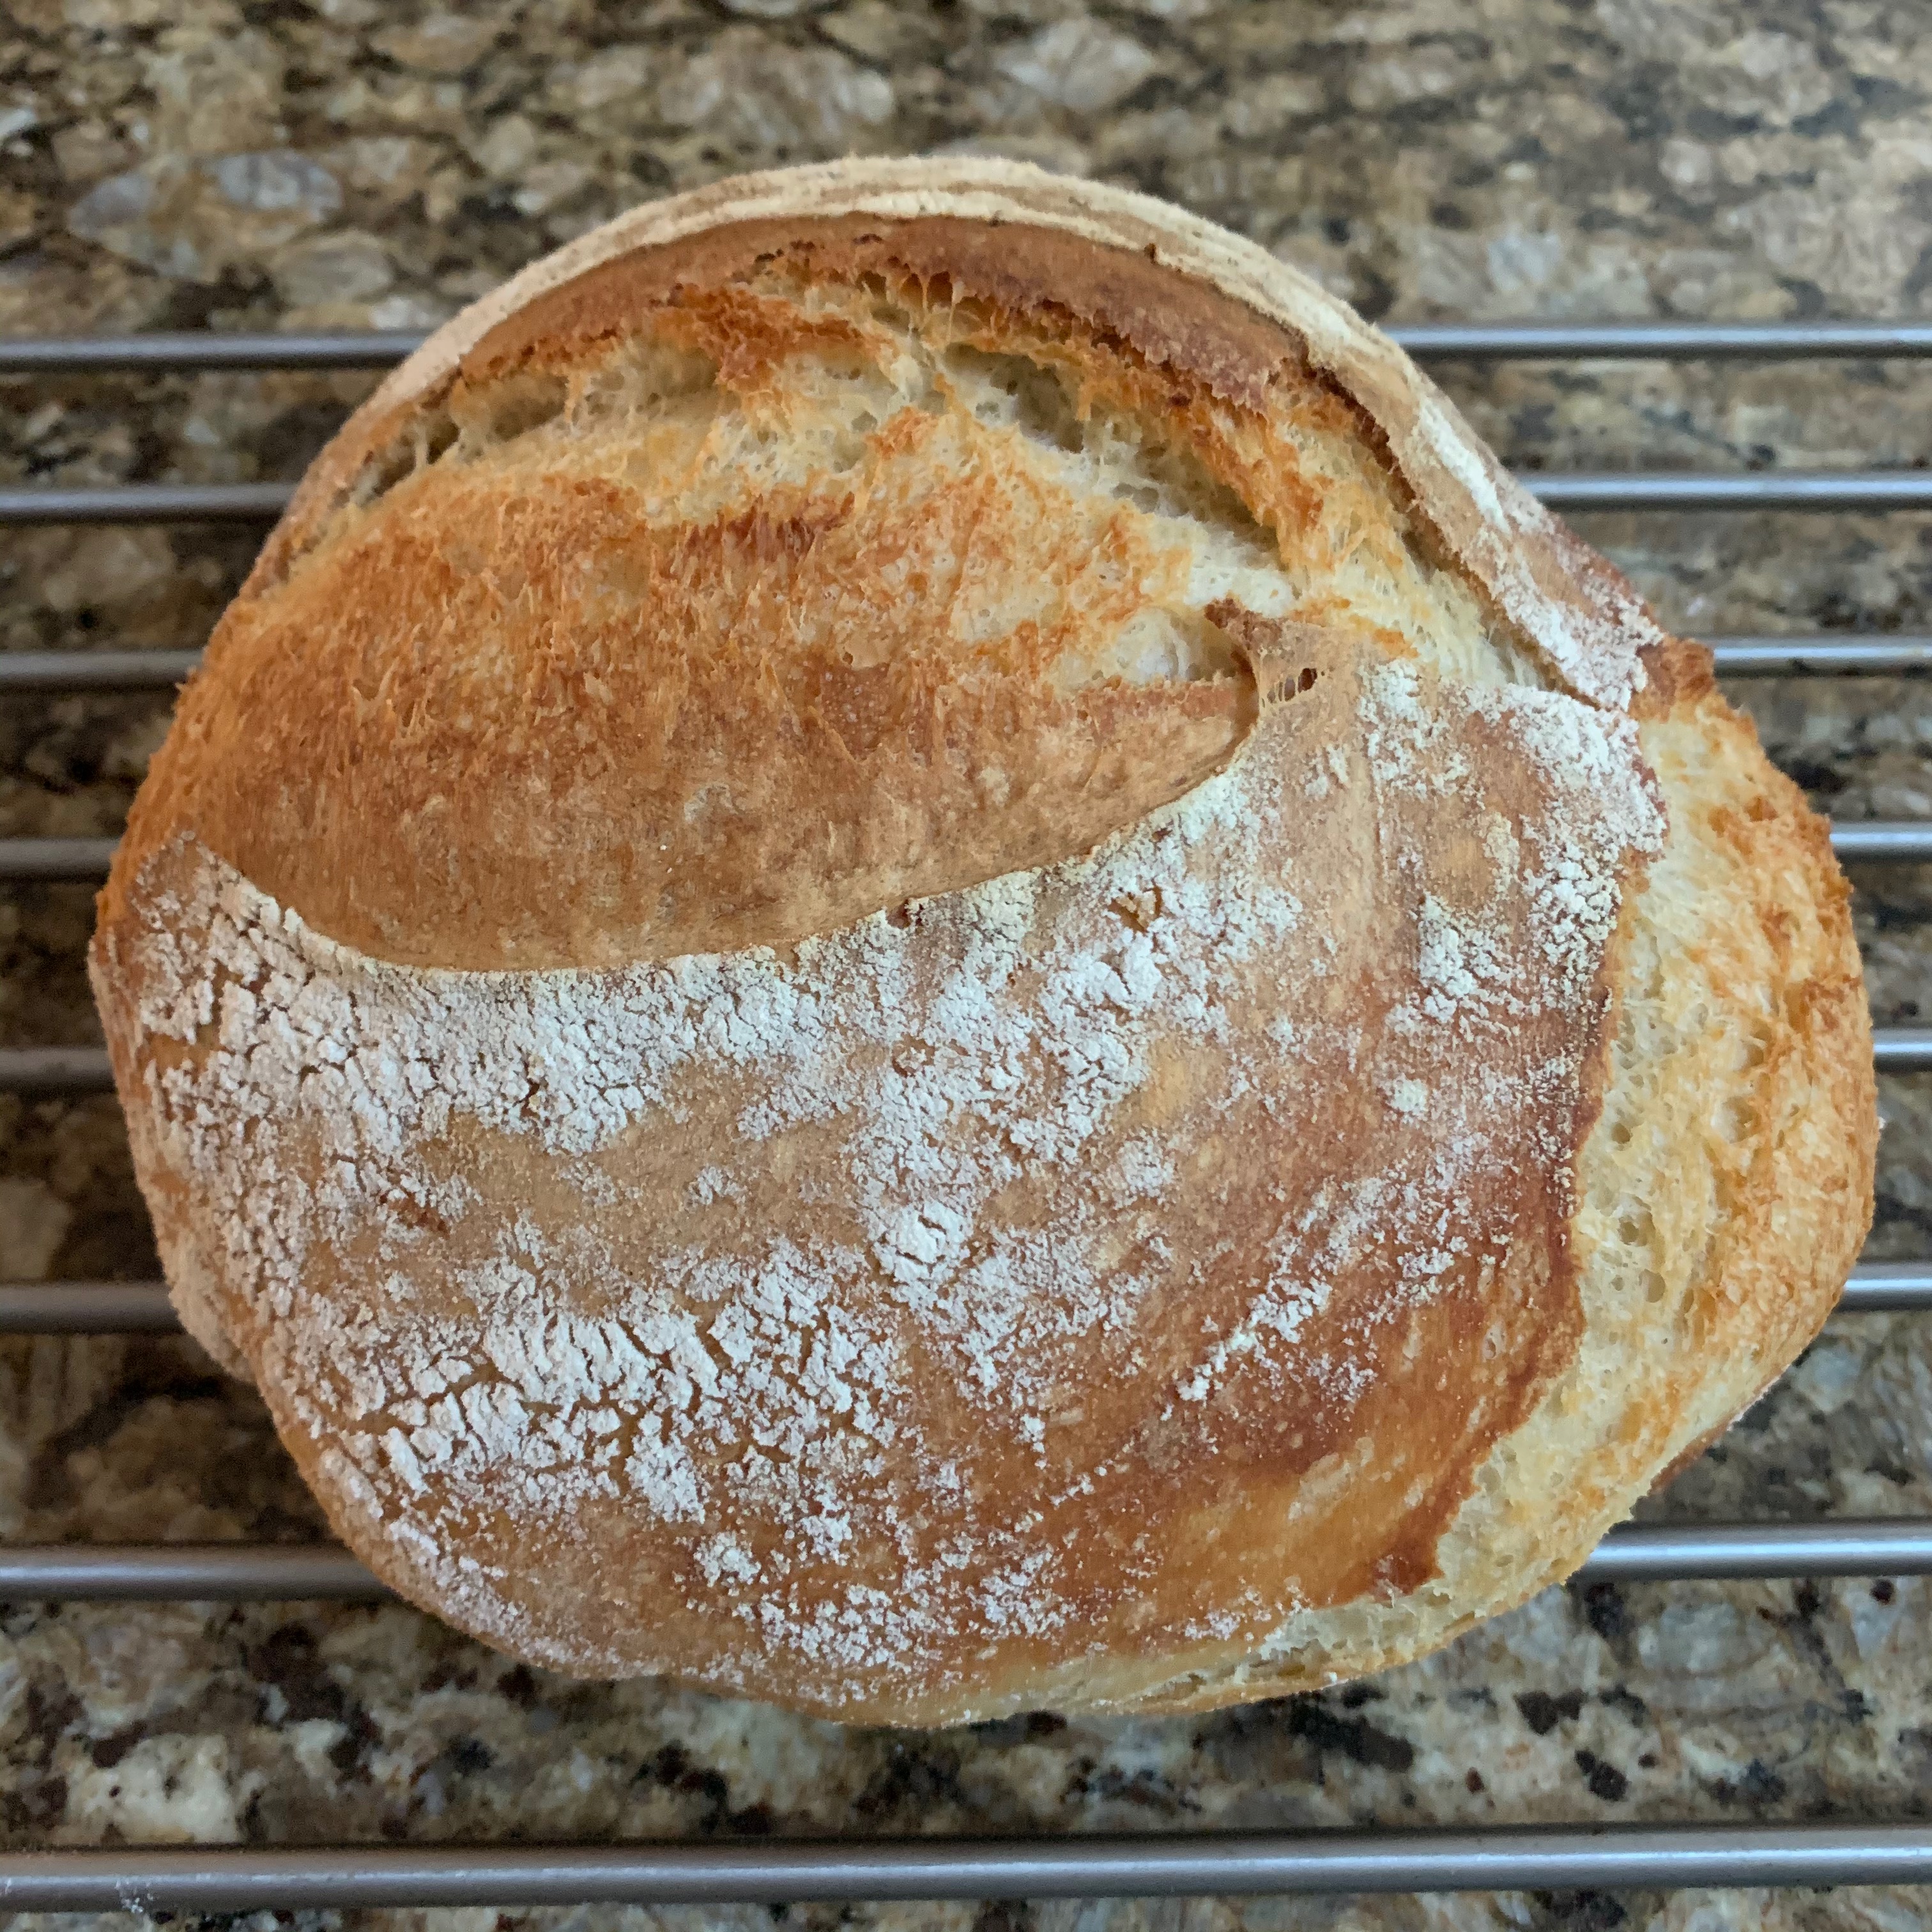 Yes, I bake sourdough bread. Yes, I made this. 